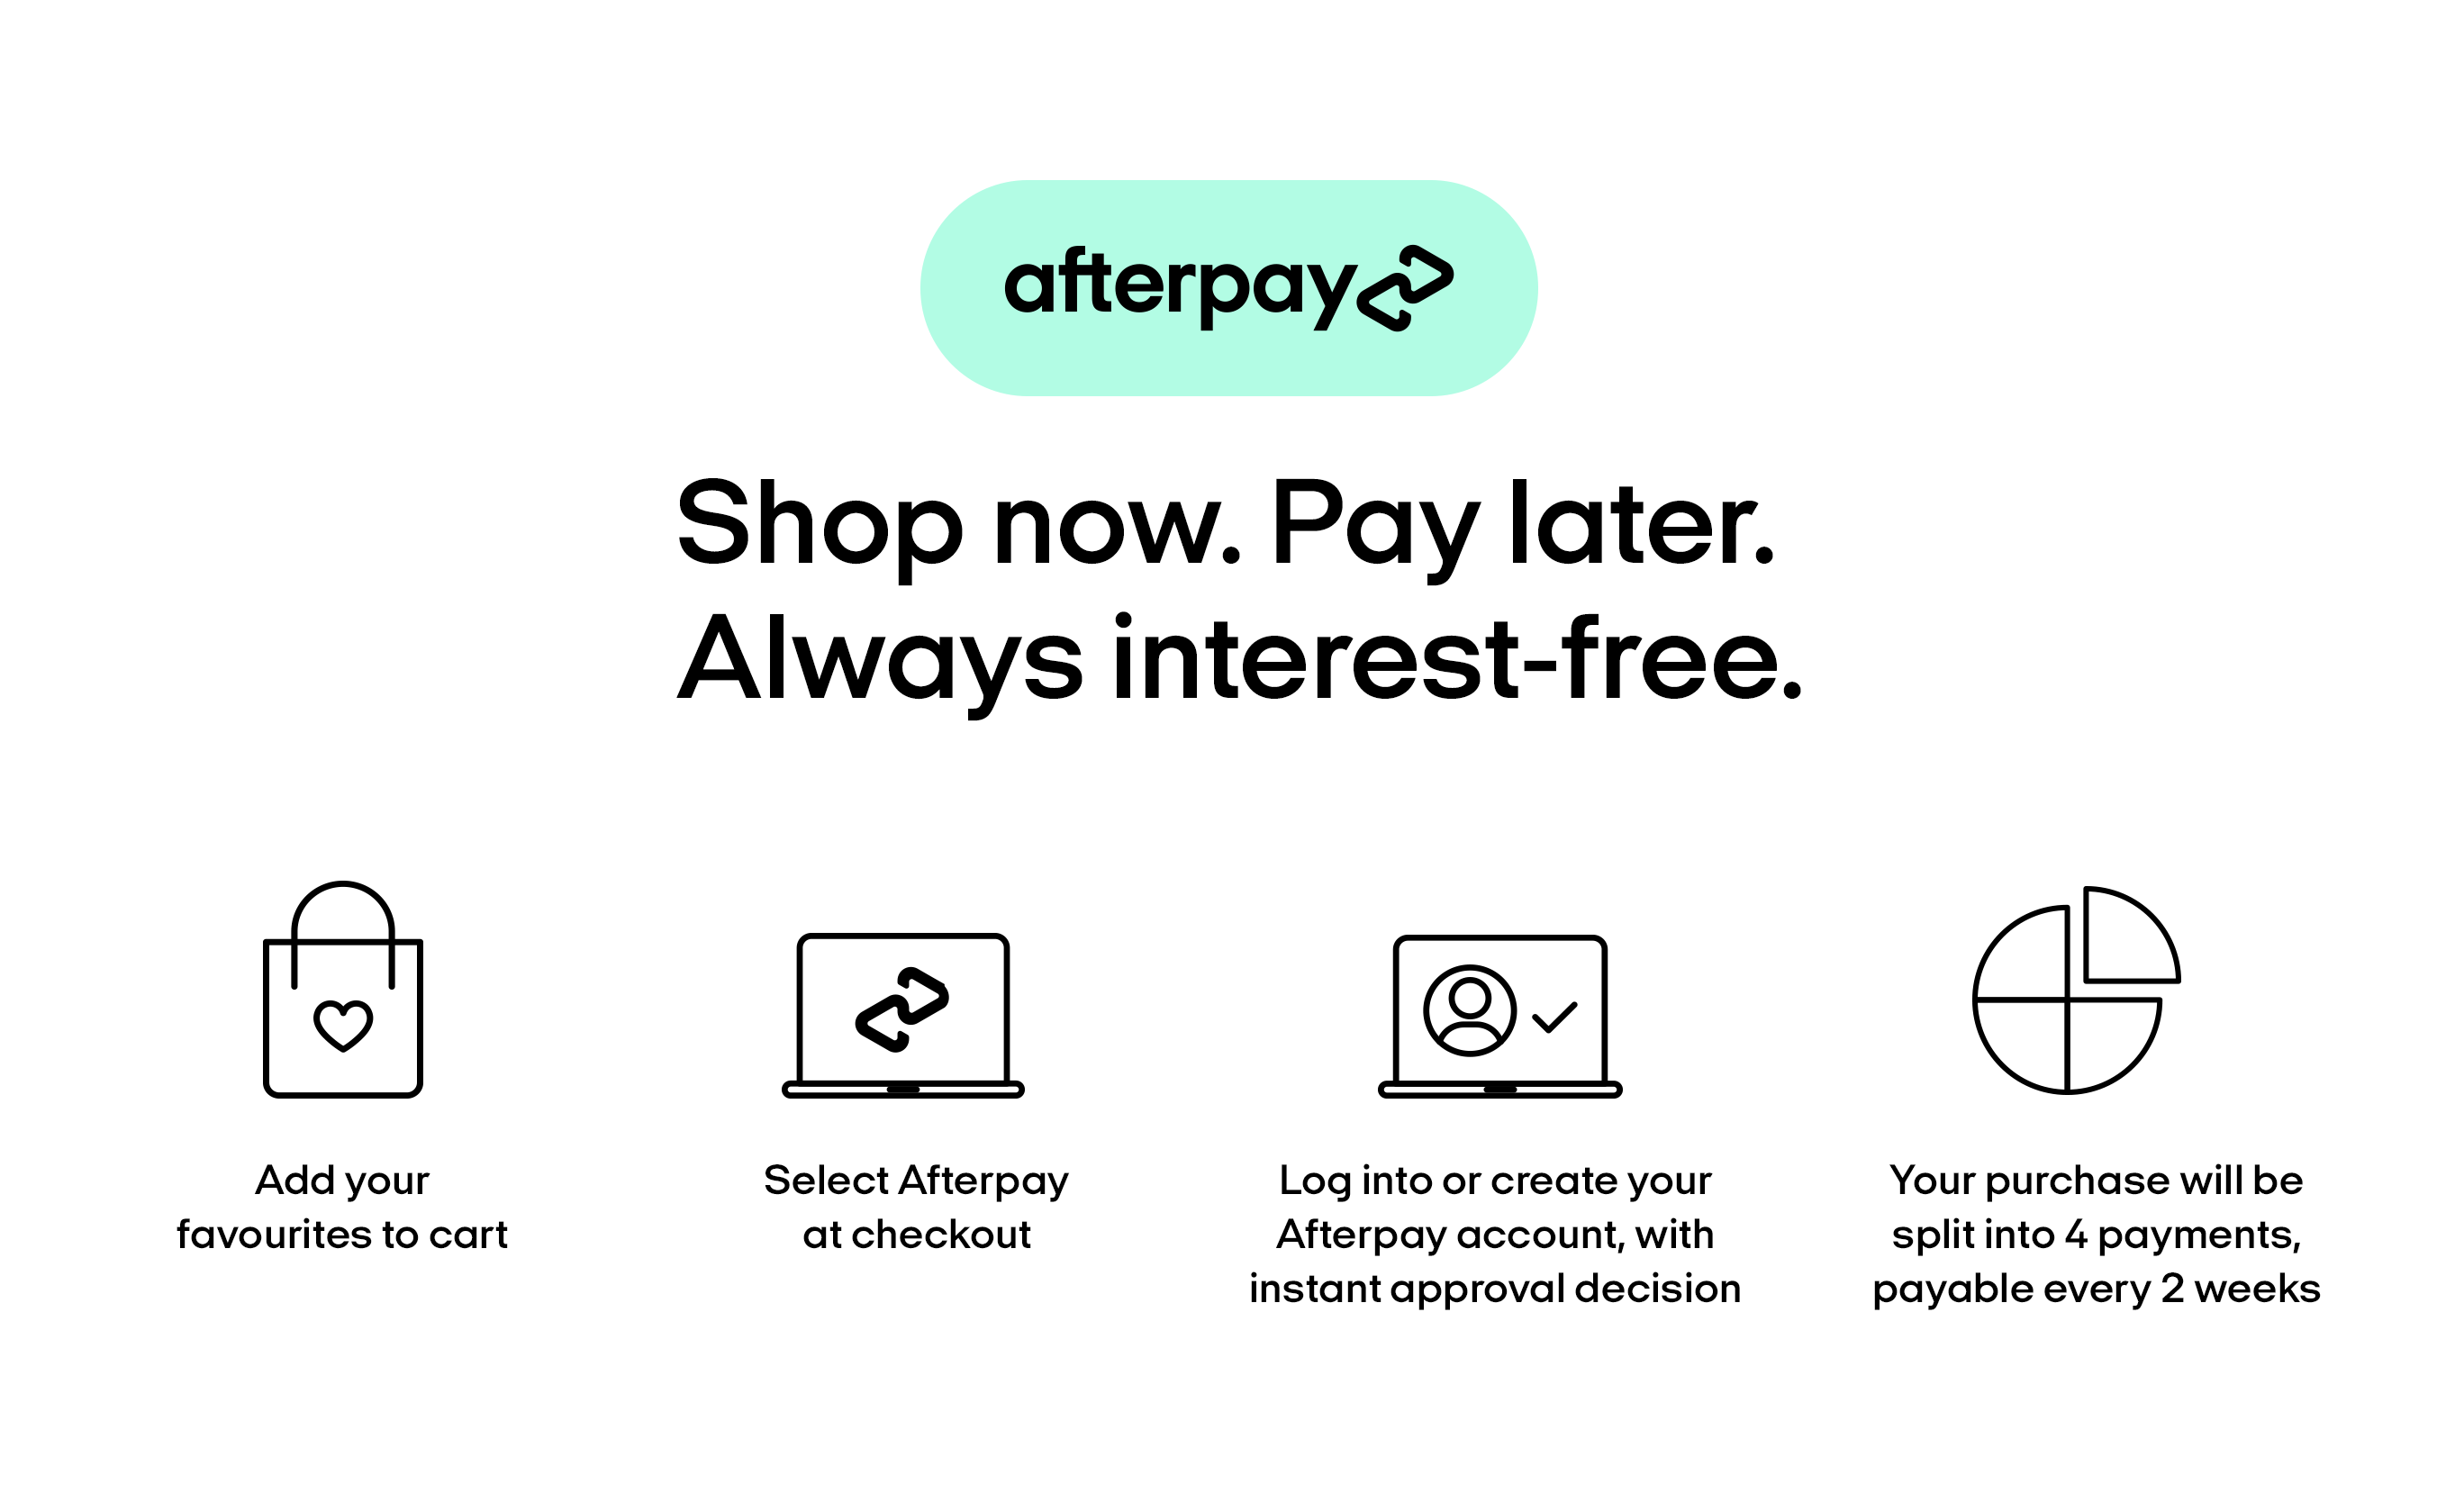 Afterpay. Shop now. Pay later. Always interest-free. 